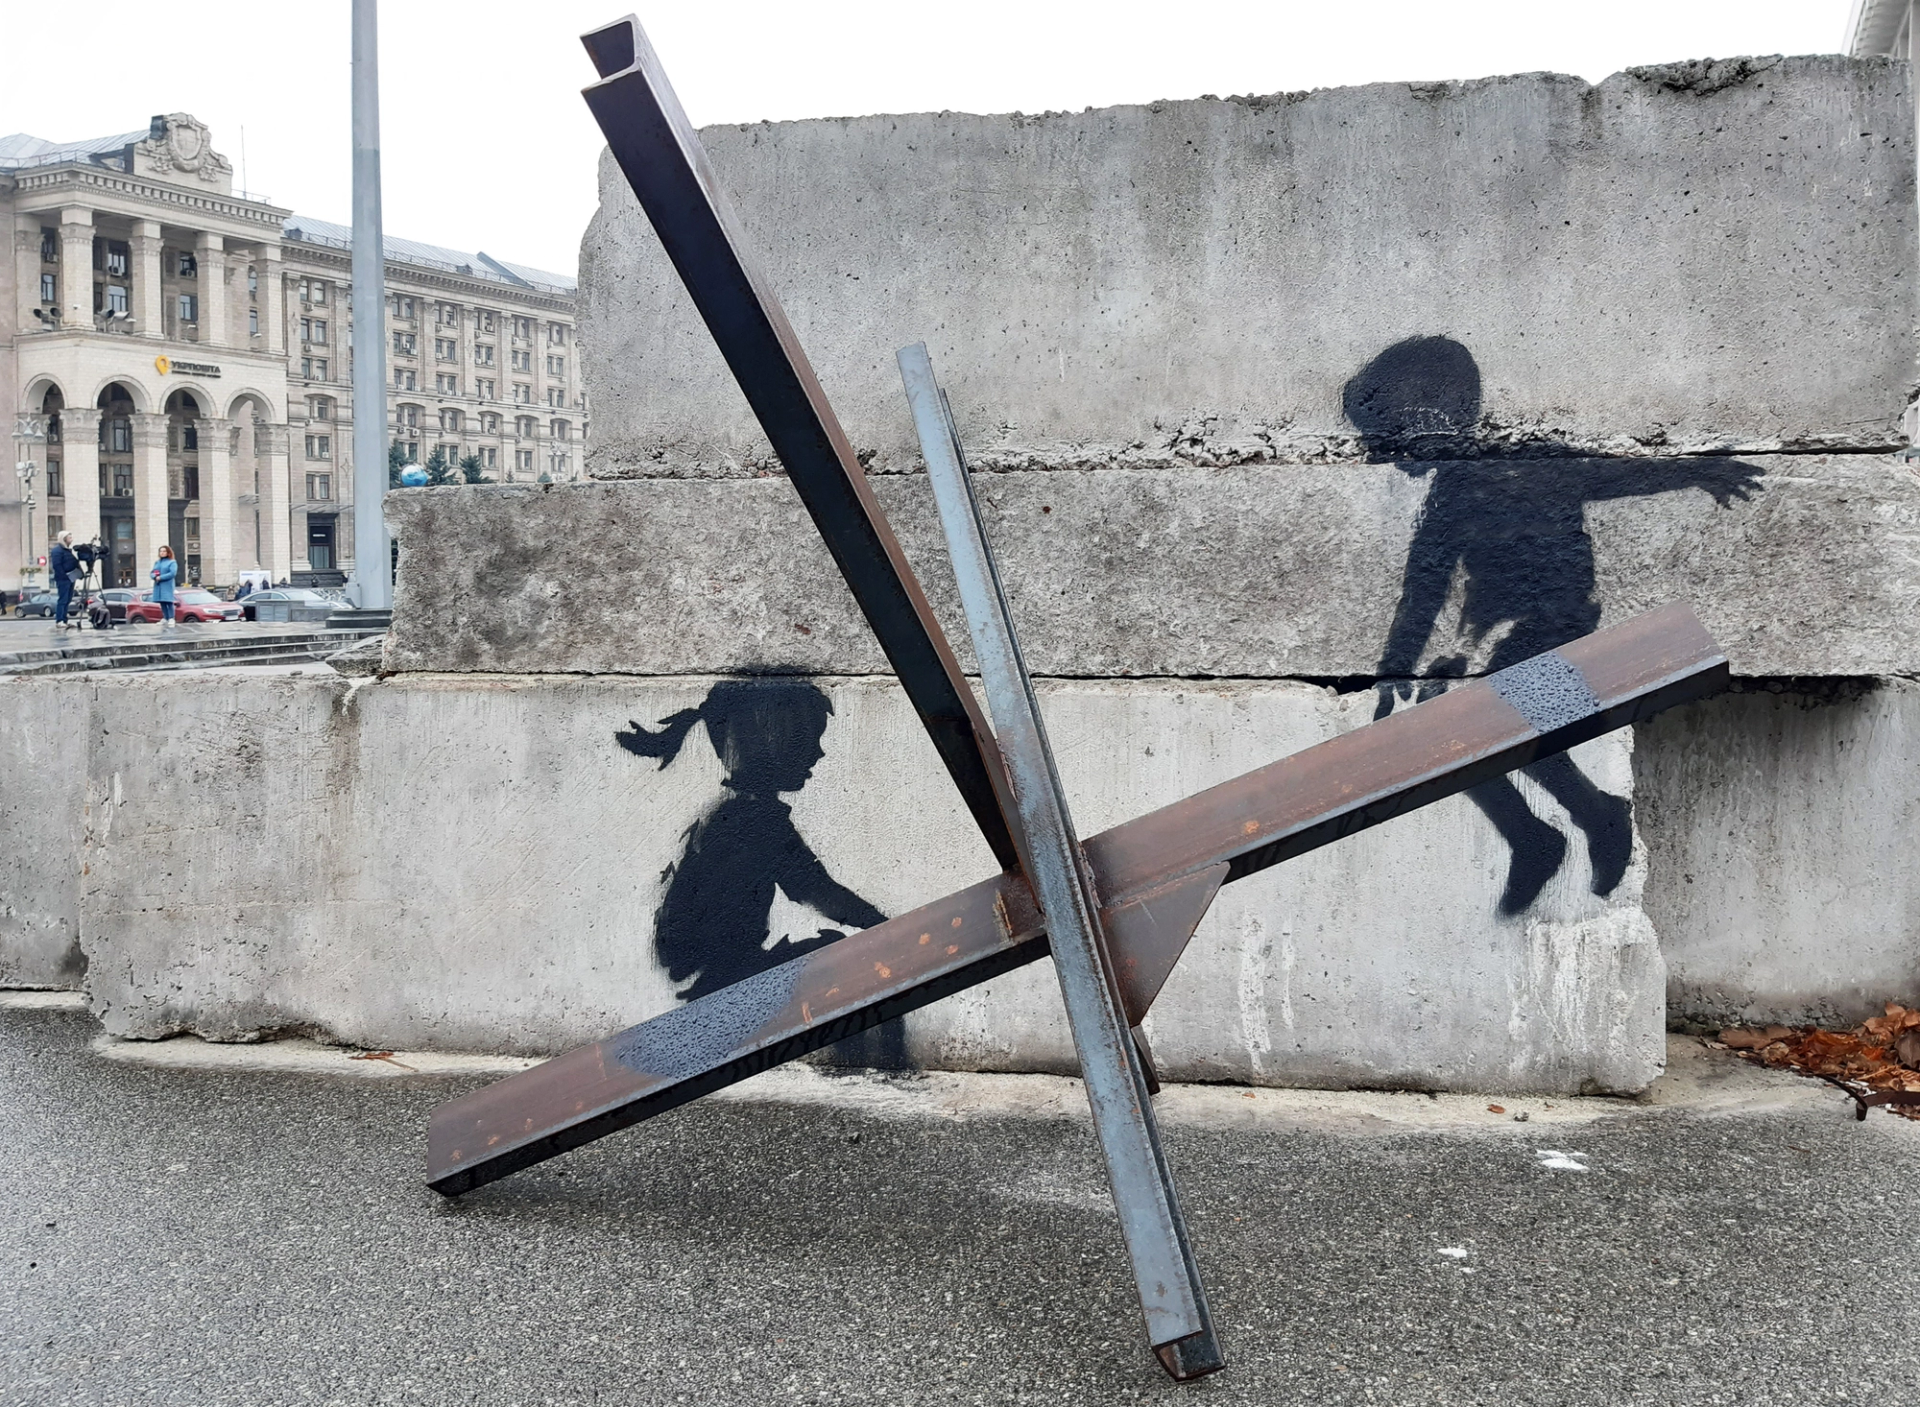 An image of a Banksy mural in Independence Square, Ukraine. It shows the silhouette of two young children, a boy and a girl, playing on a seesaw made out of shrapnel.